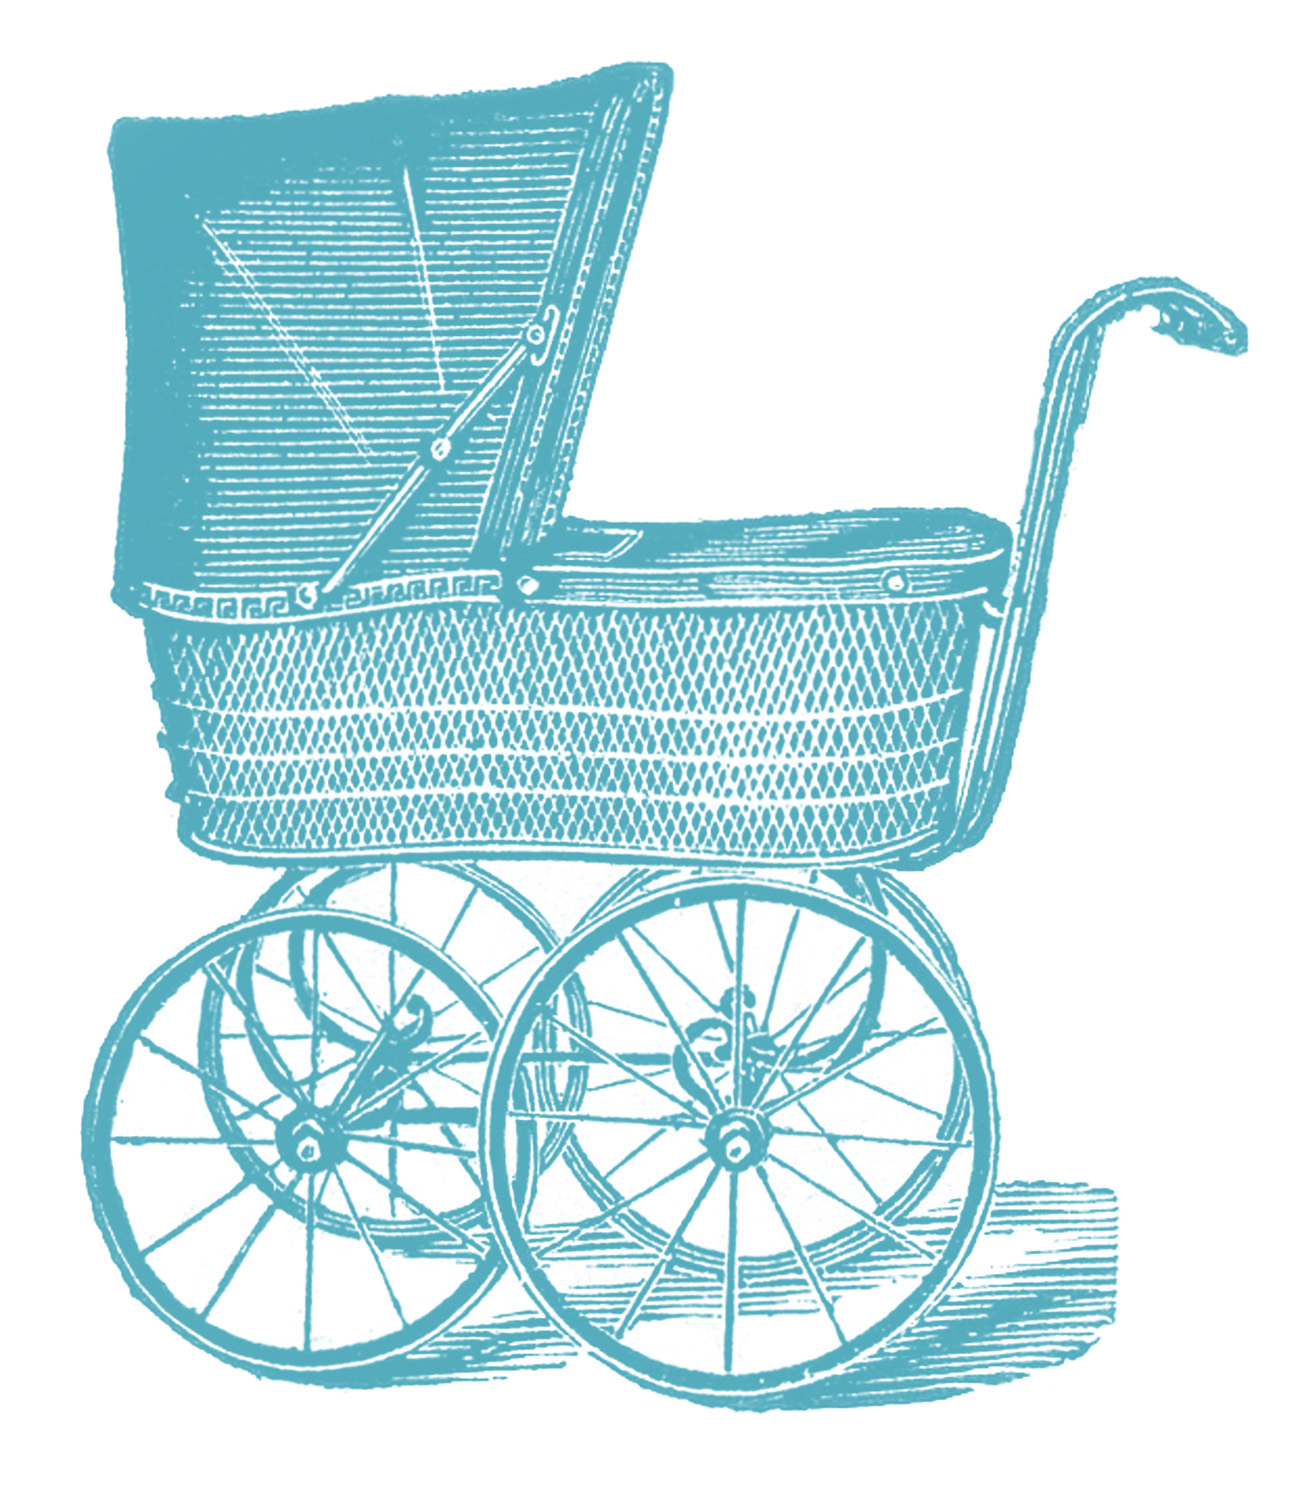 Royalty Free Images - Vintage Baby Carriages - The Graphics Fairy